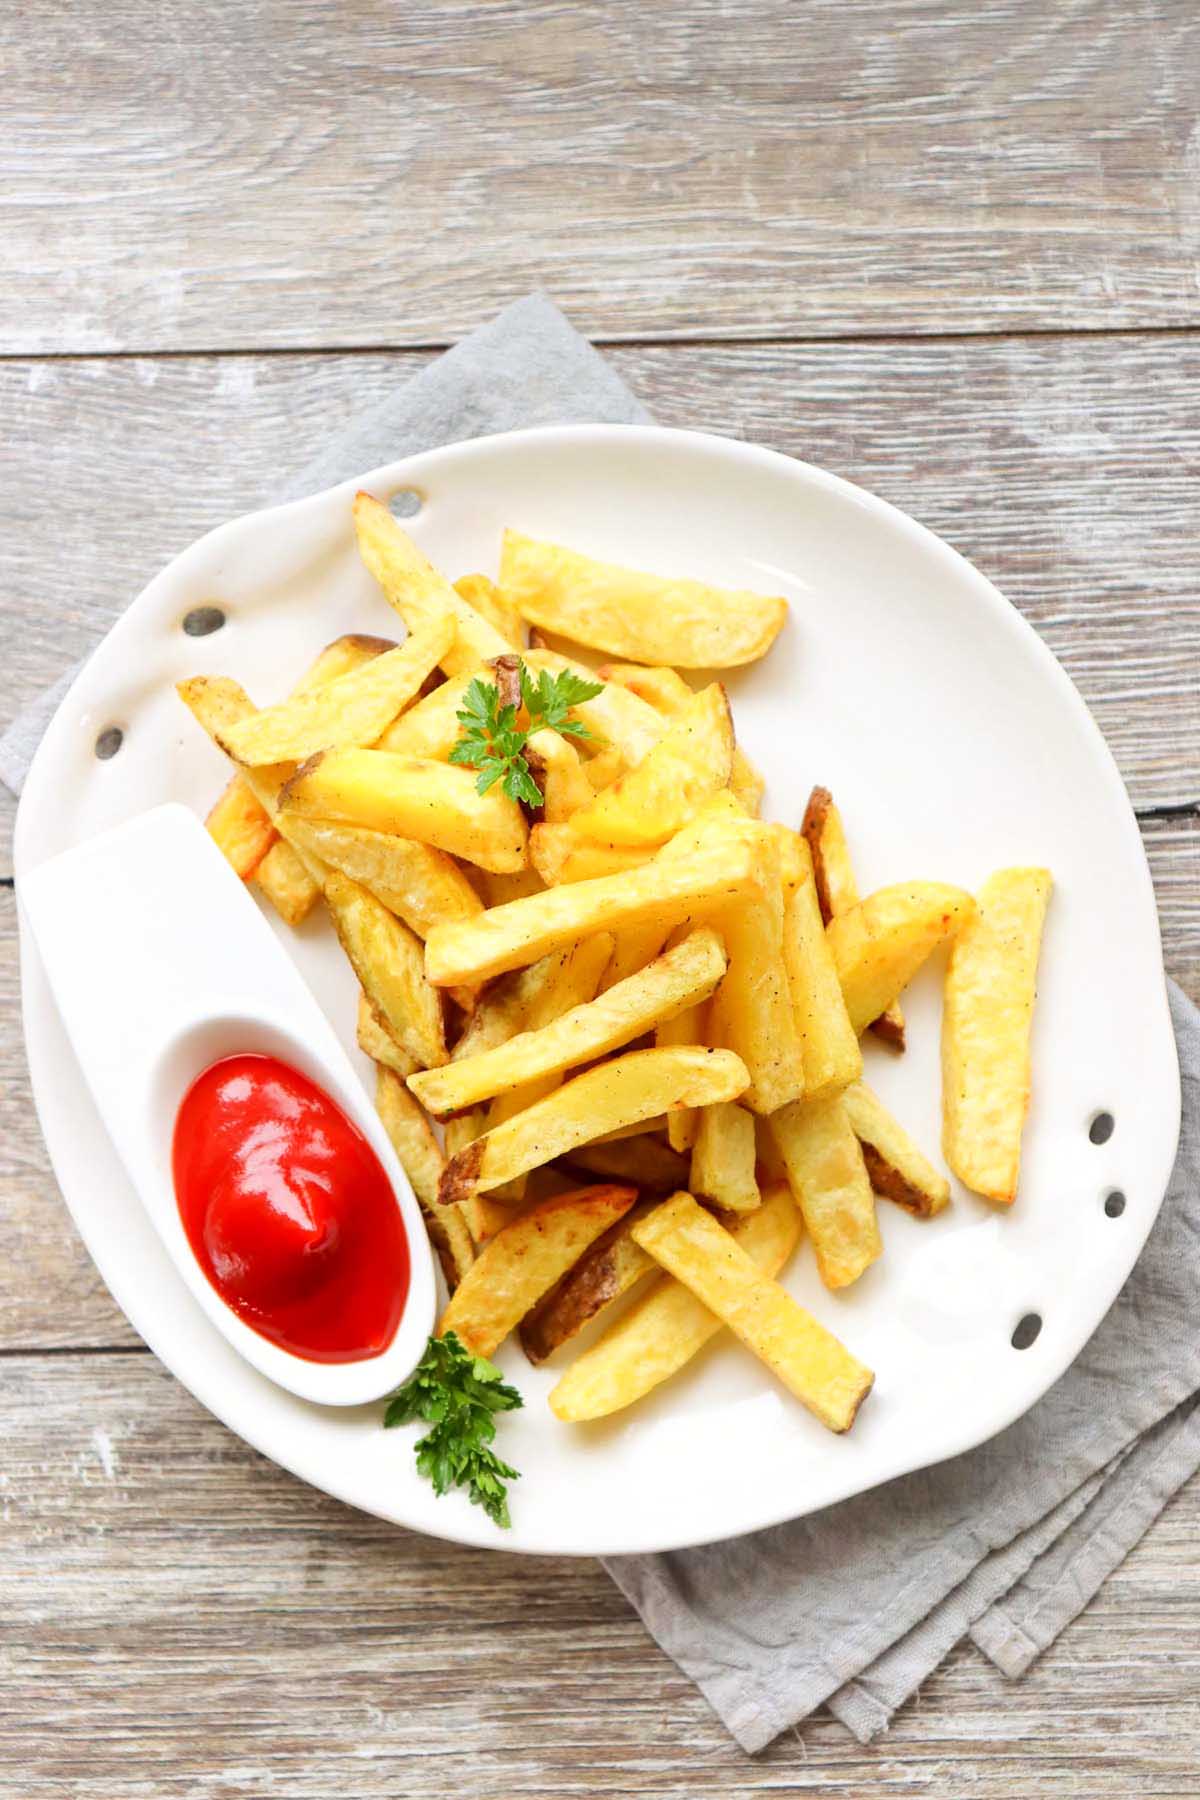 Fries on a white plate.